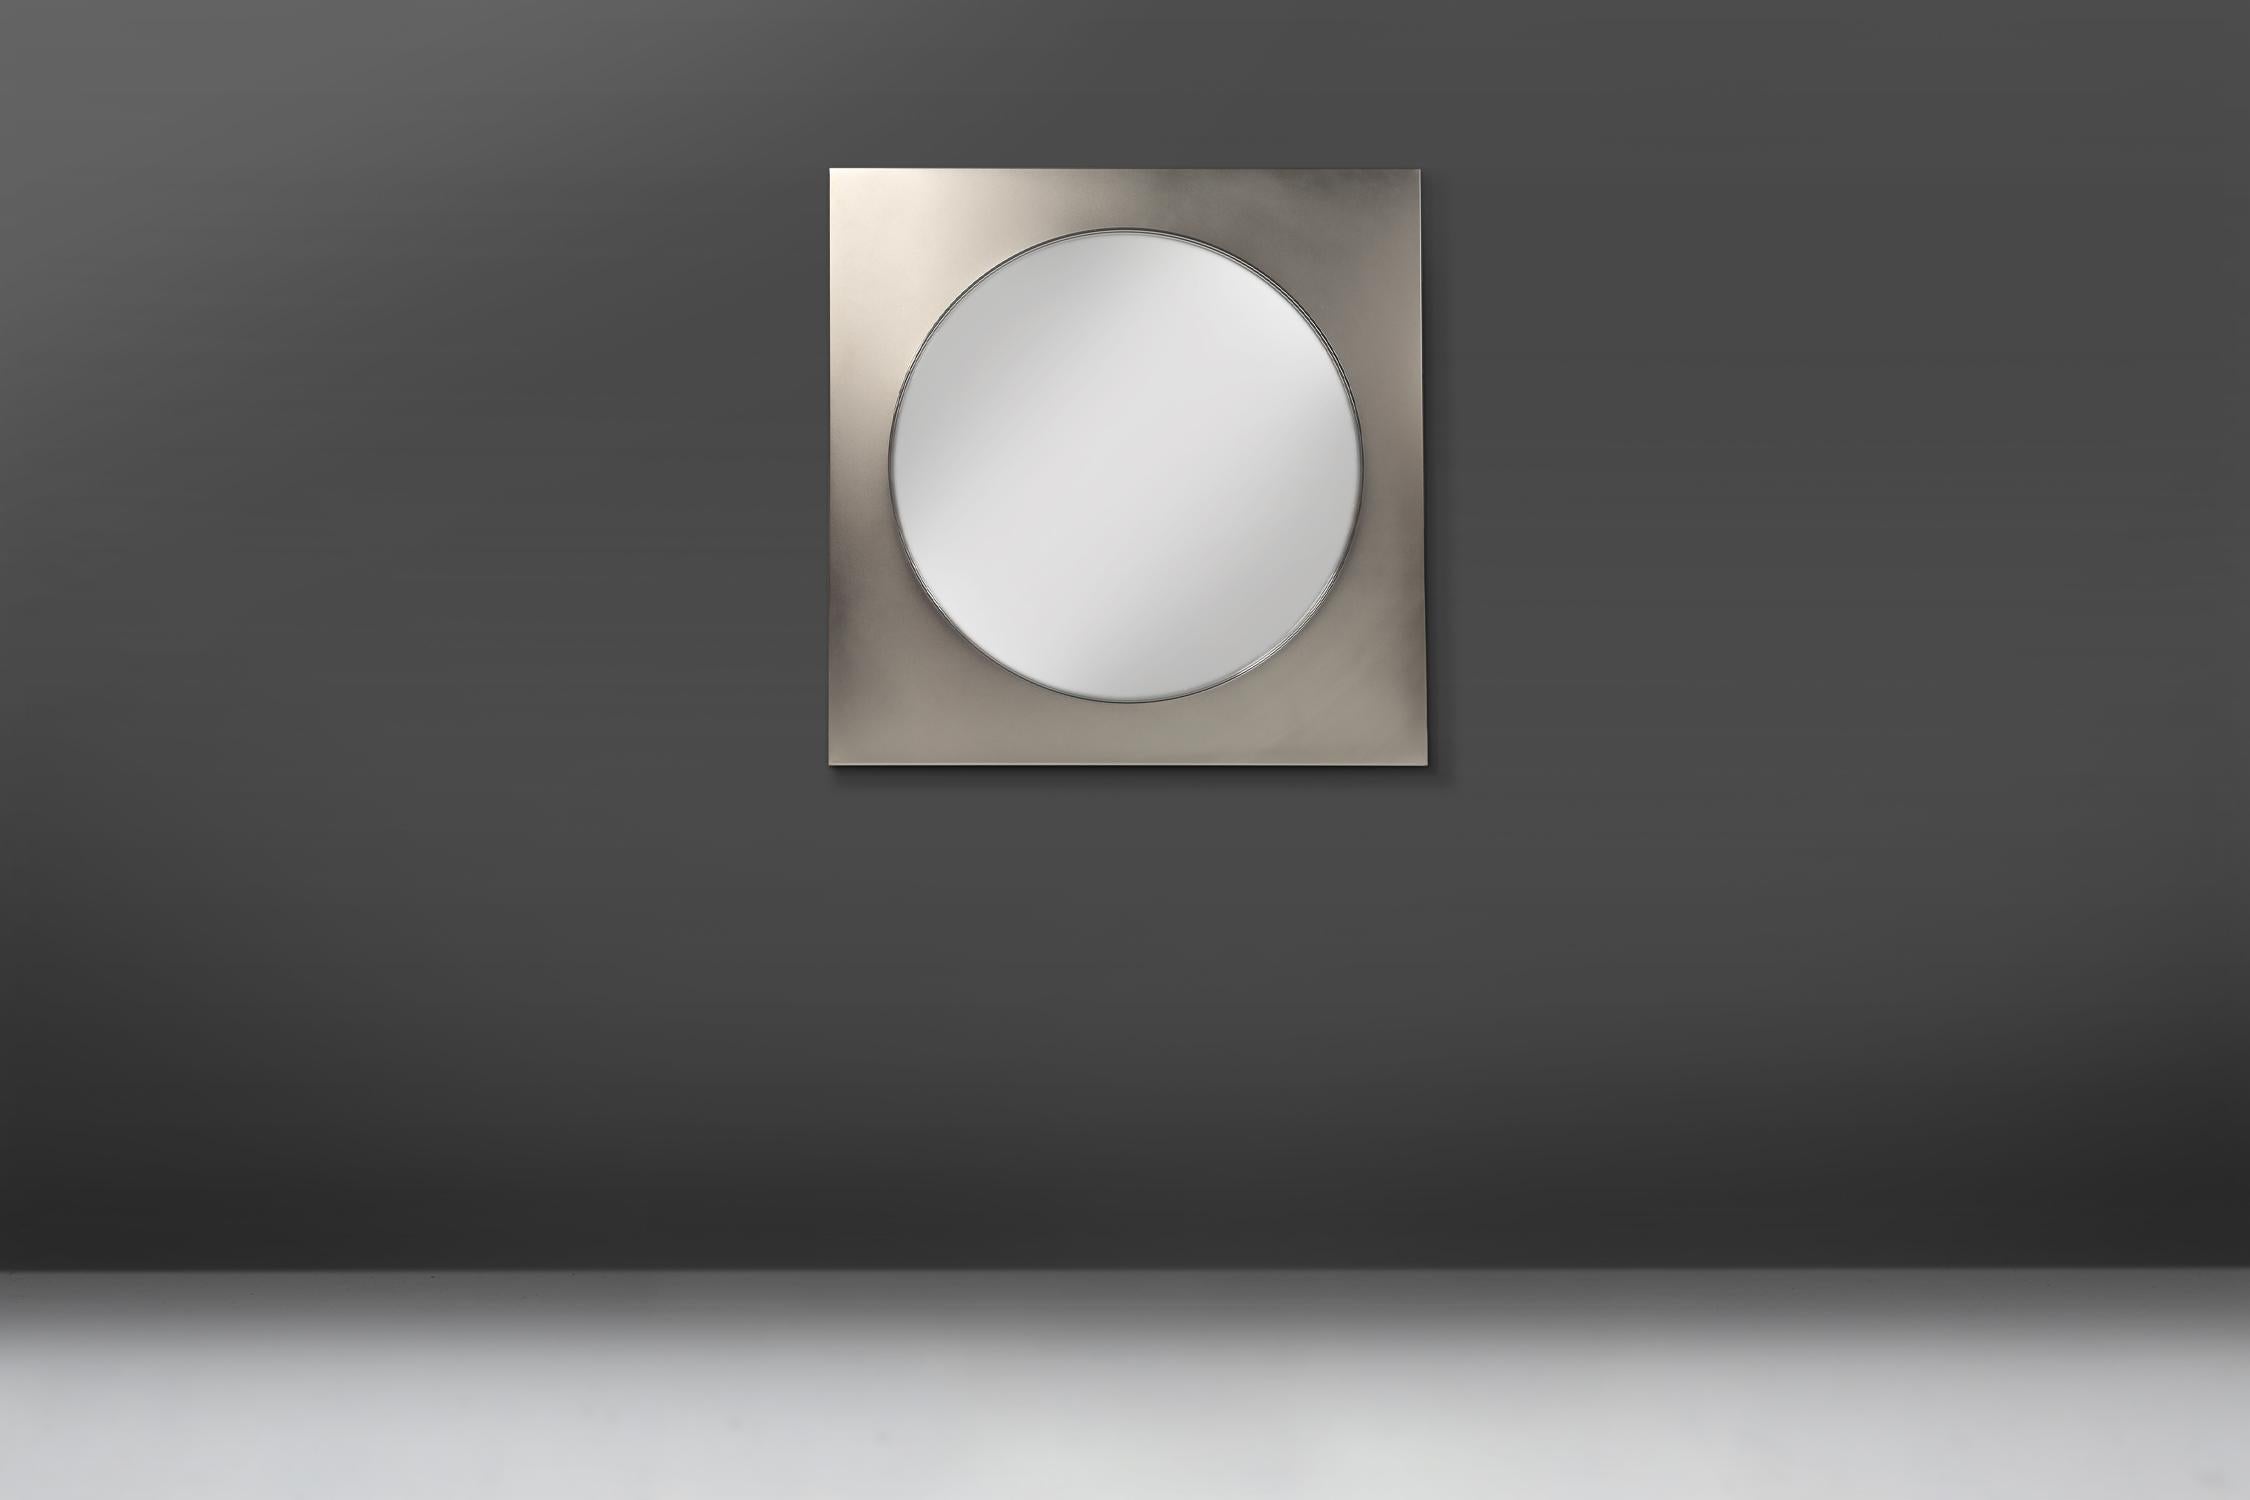 Minimalist square mirror by Belgo Chrome in brushed steel made in the late 1970s.
In a very good condition. The diameter of the mirror is 80 cm.